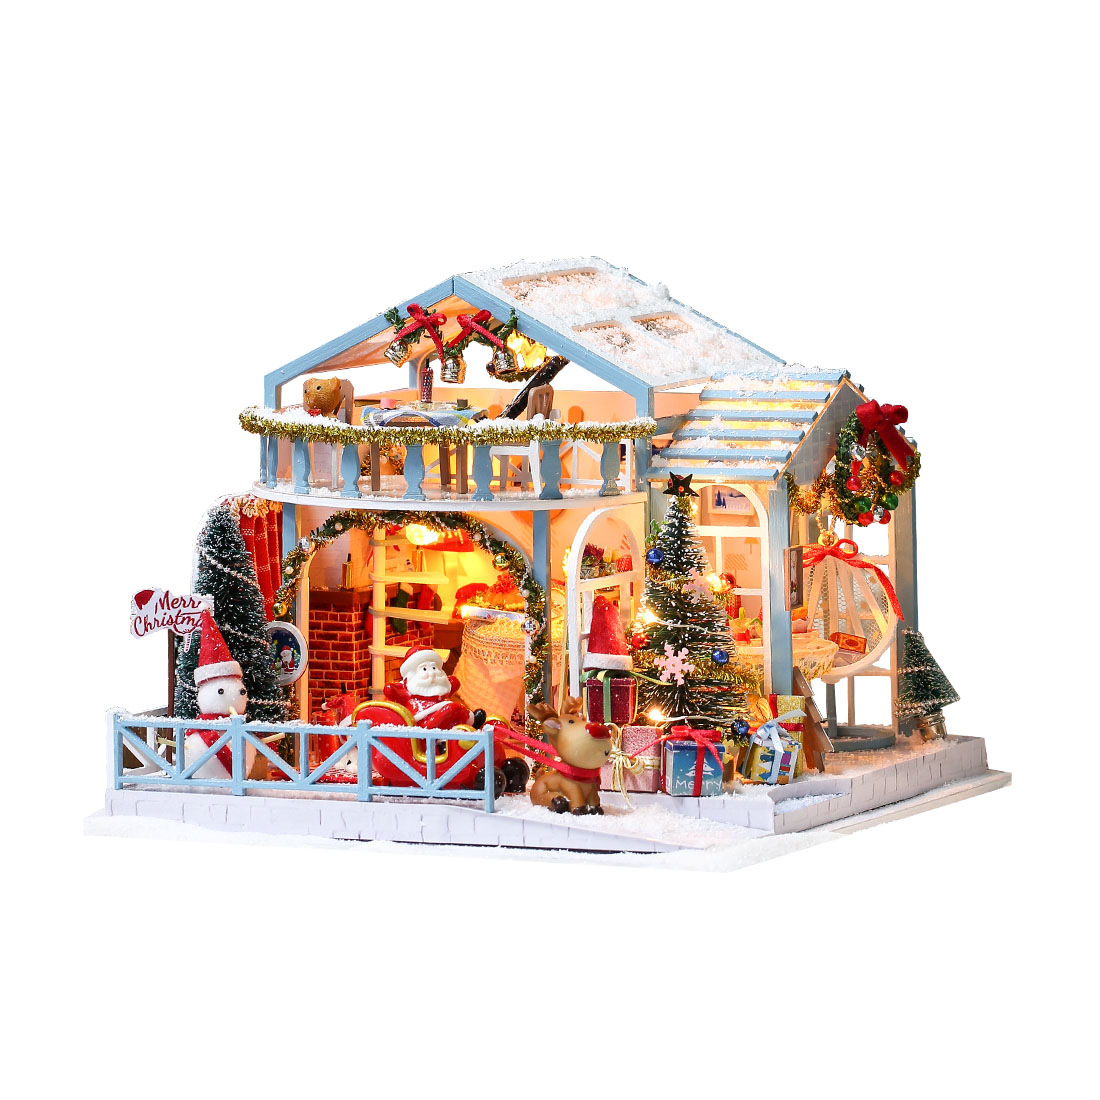 Snowy Christmas Night 3D DIY Assembly Miniature Art Cottage Model Kit Creative Ornament Christmas Gift